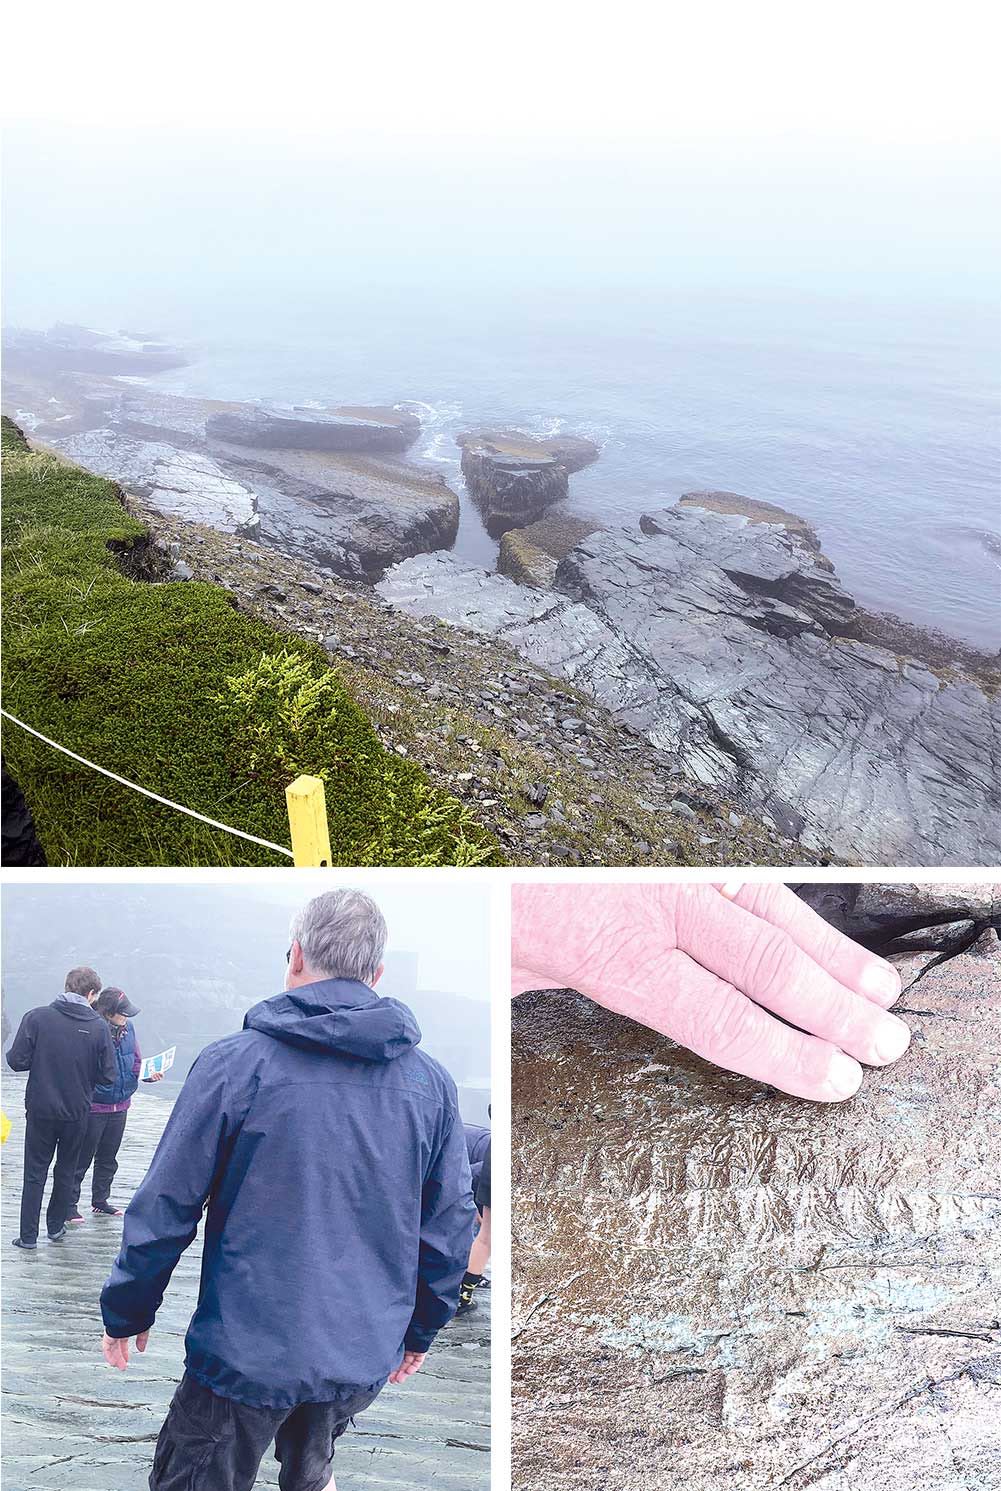 In the above photographs, we see the beach at Mistaken Point from above, Bishop Watton (from the back and with his shoes off), and an example of a fossil